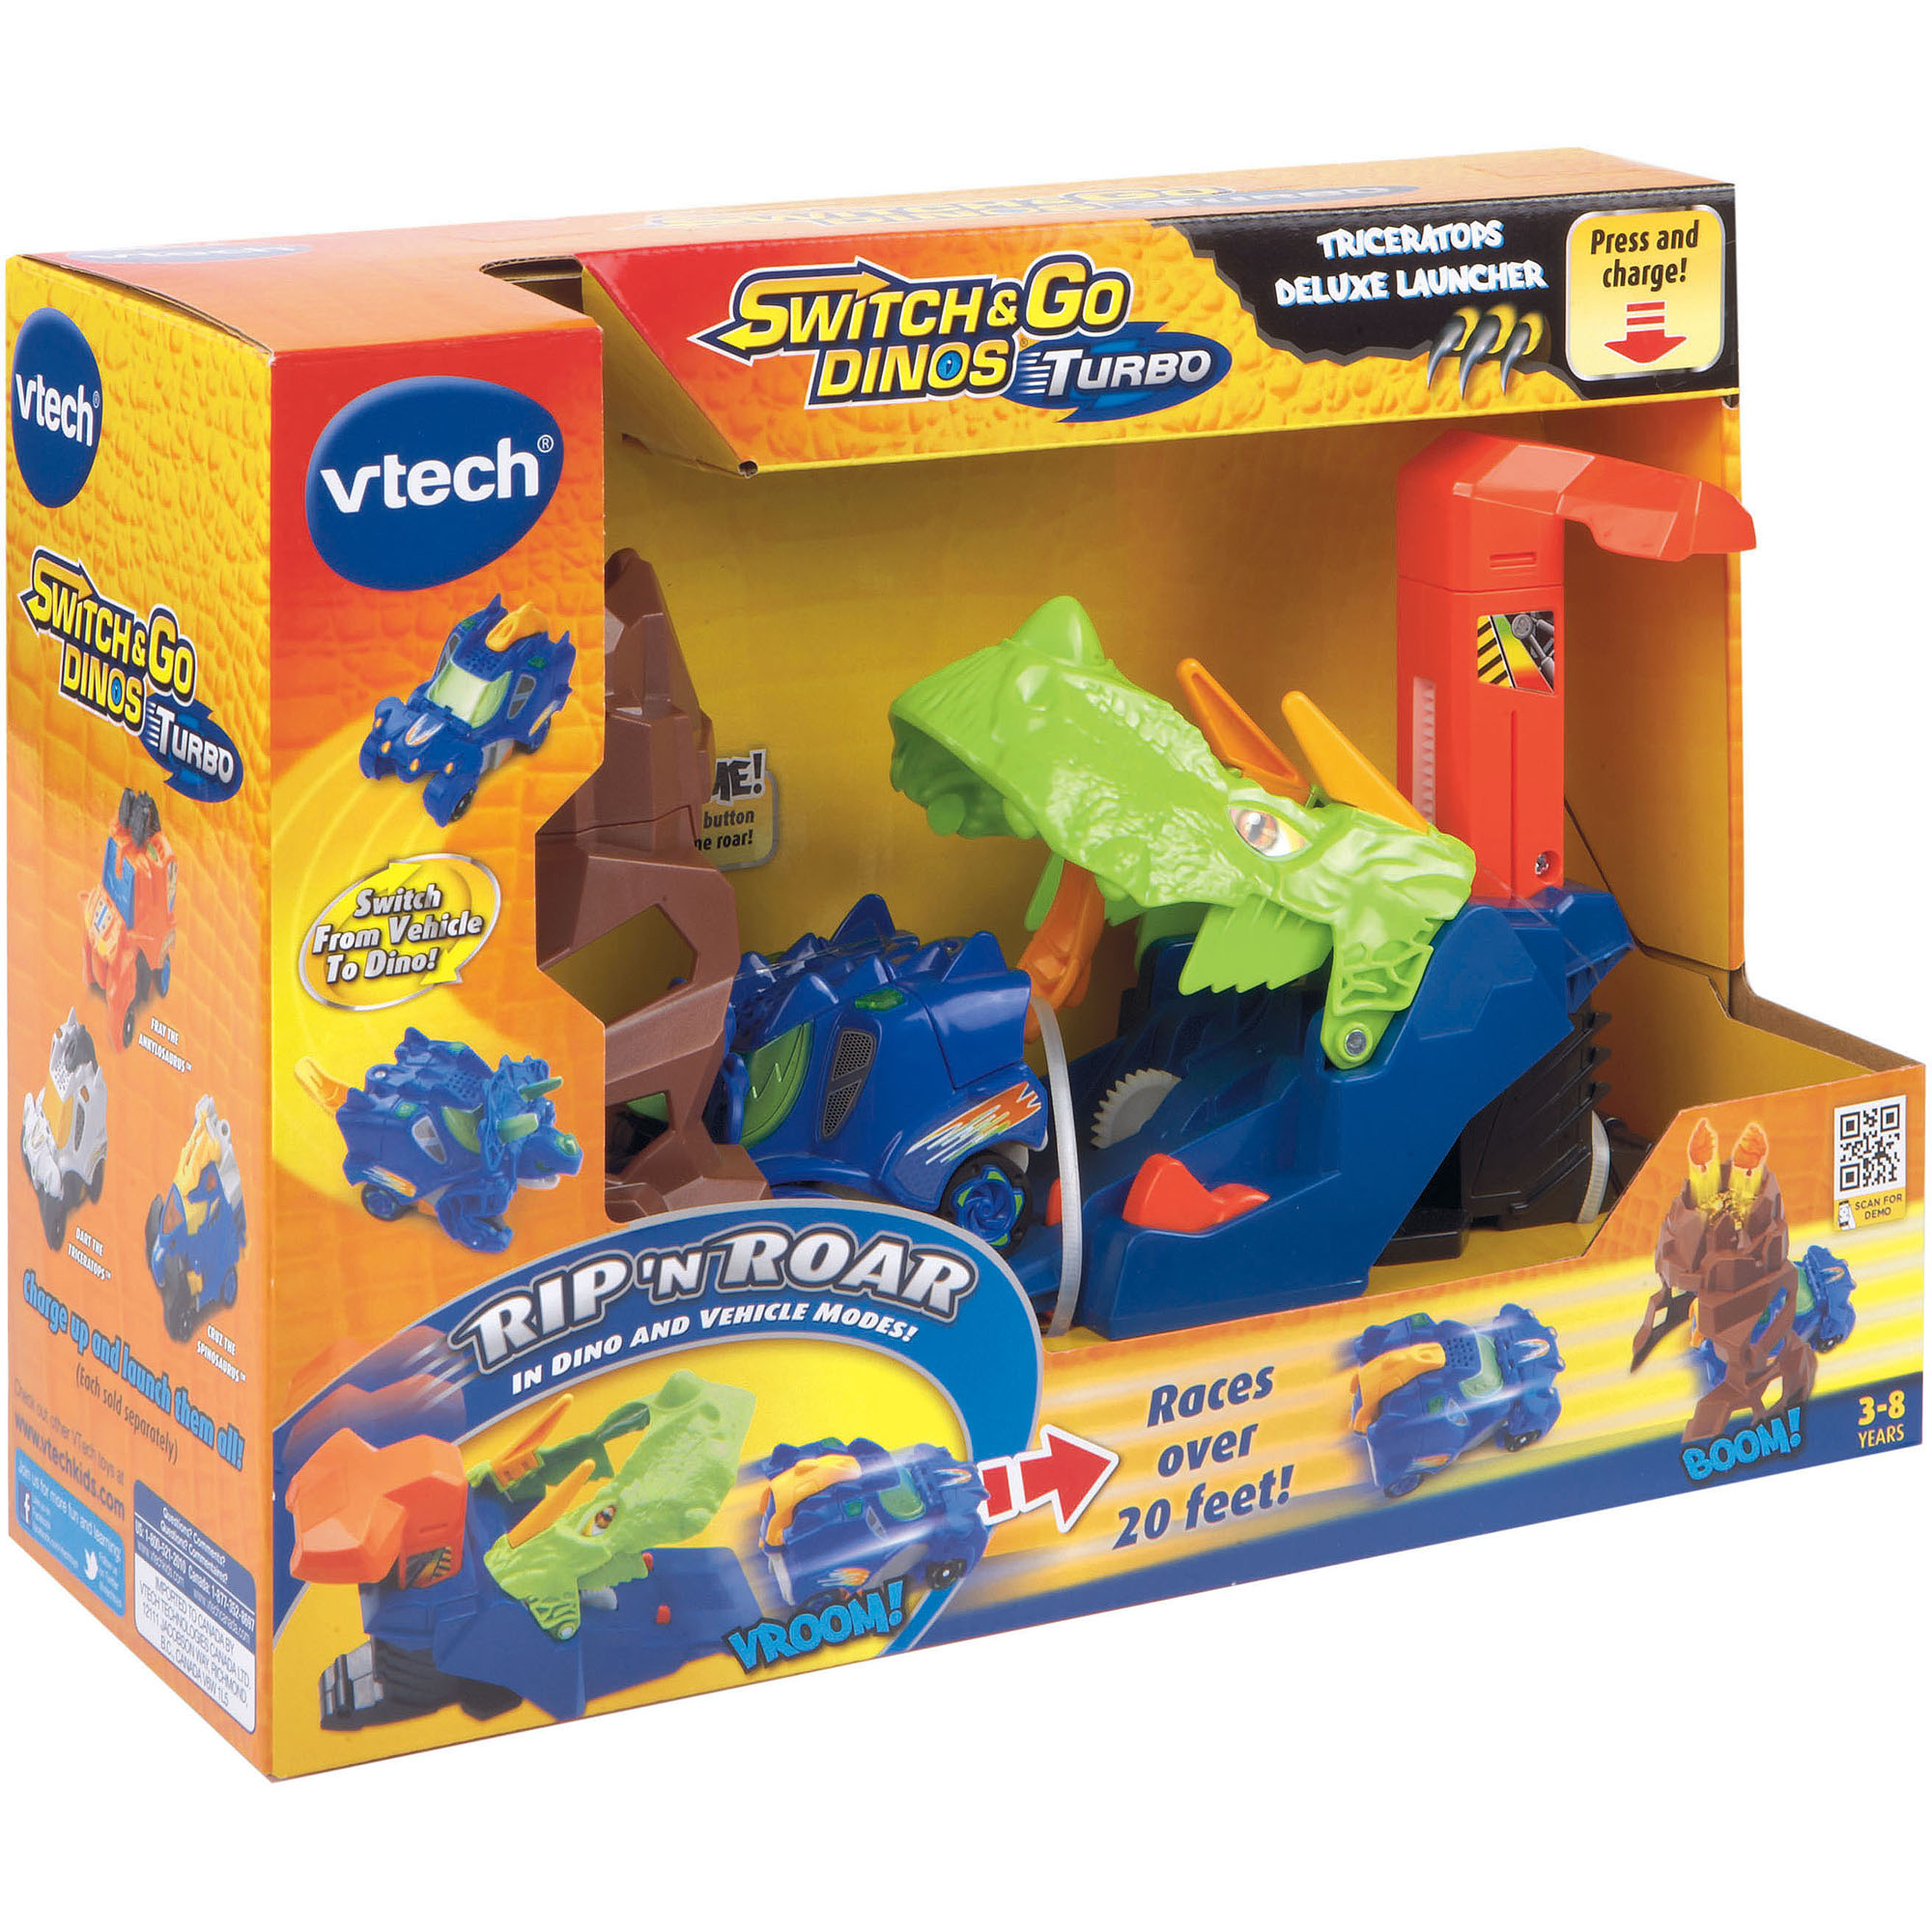 Vtech Switch And Go Dinos Triceratops Launcher - image 1 of 14